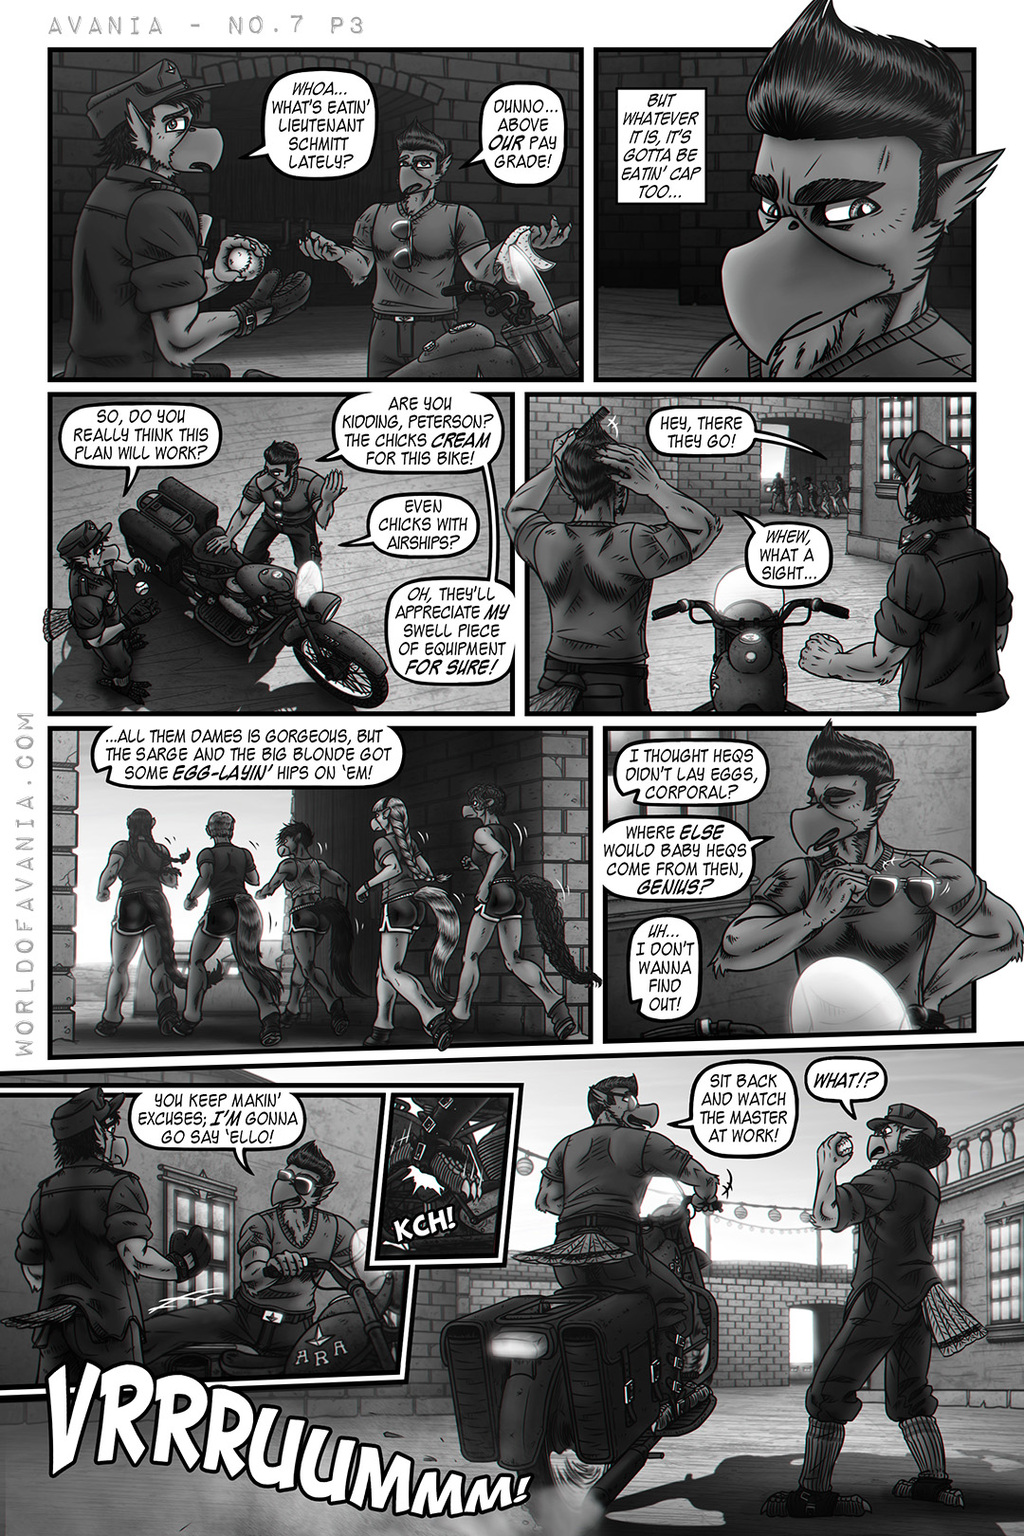 Avania Comic - Issue No.7, Page 3